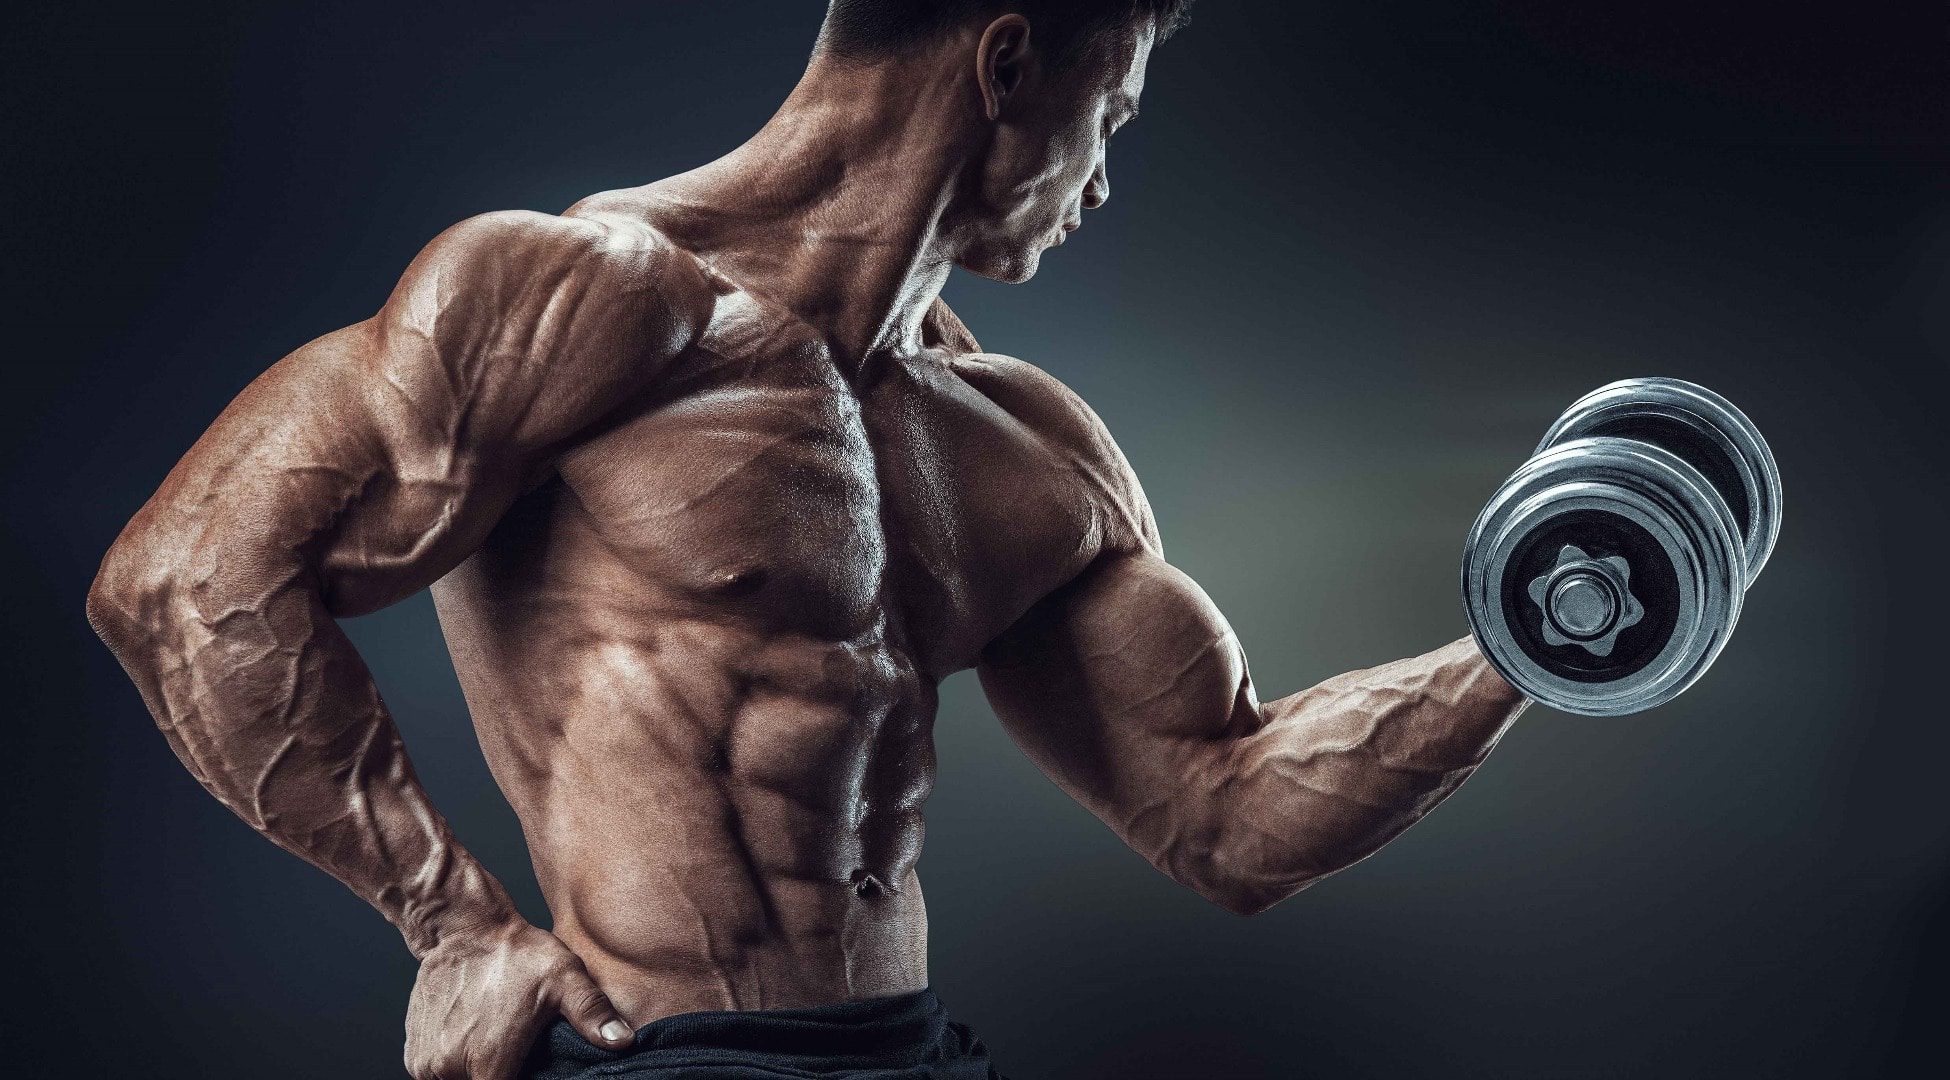 Between Sets: How Long Should You Rest To Build Muscle Faster?